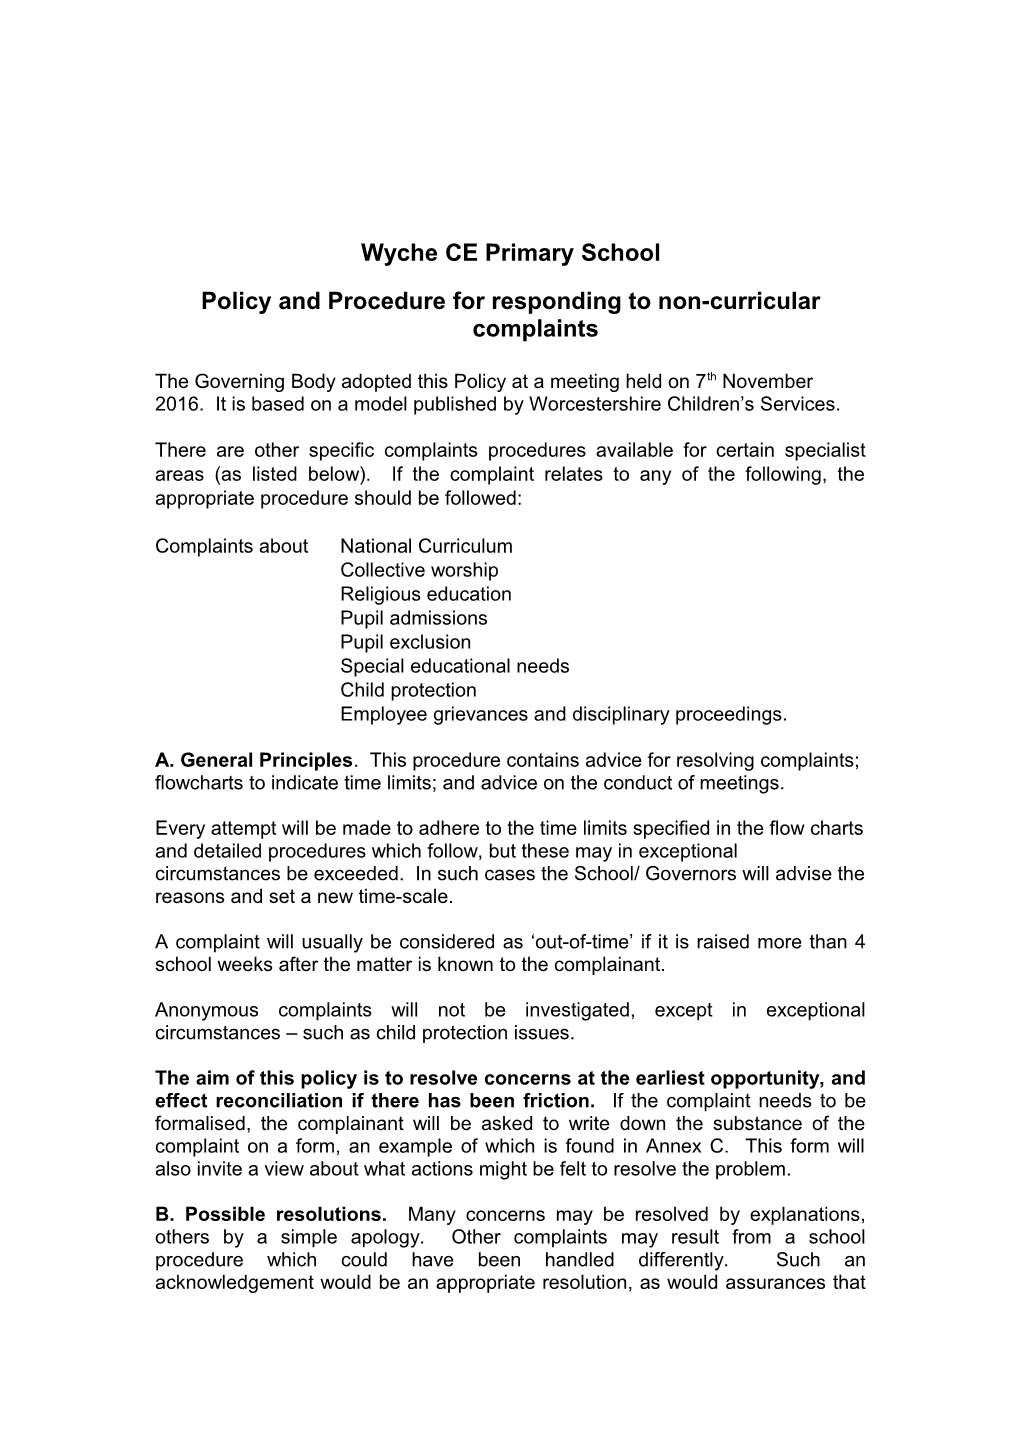 Policy and Procedure for Responding to Non-Curricular Complaints